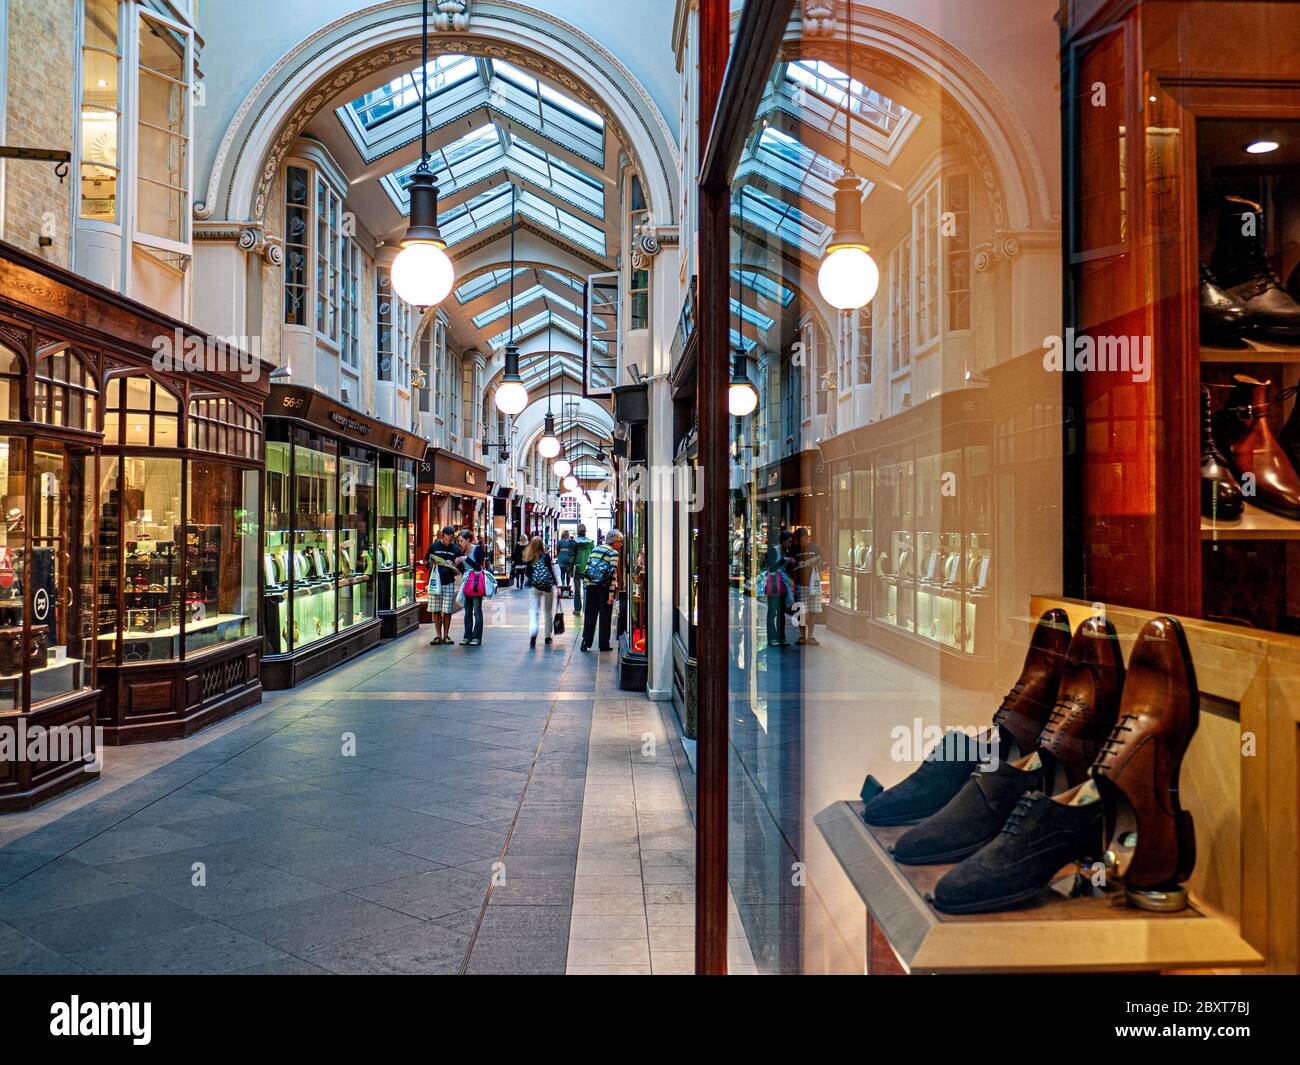 The Burlington Arcade Piccadilly London with variety of high quality shops offering a quiet luxury shopping browsing experience to the discerning shopper Piccadilly London UK Stock Photo